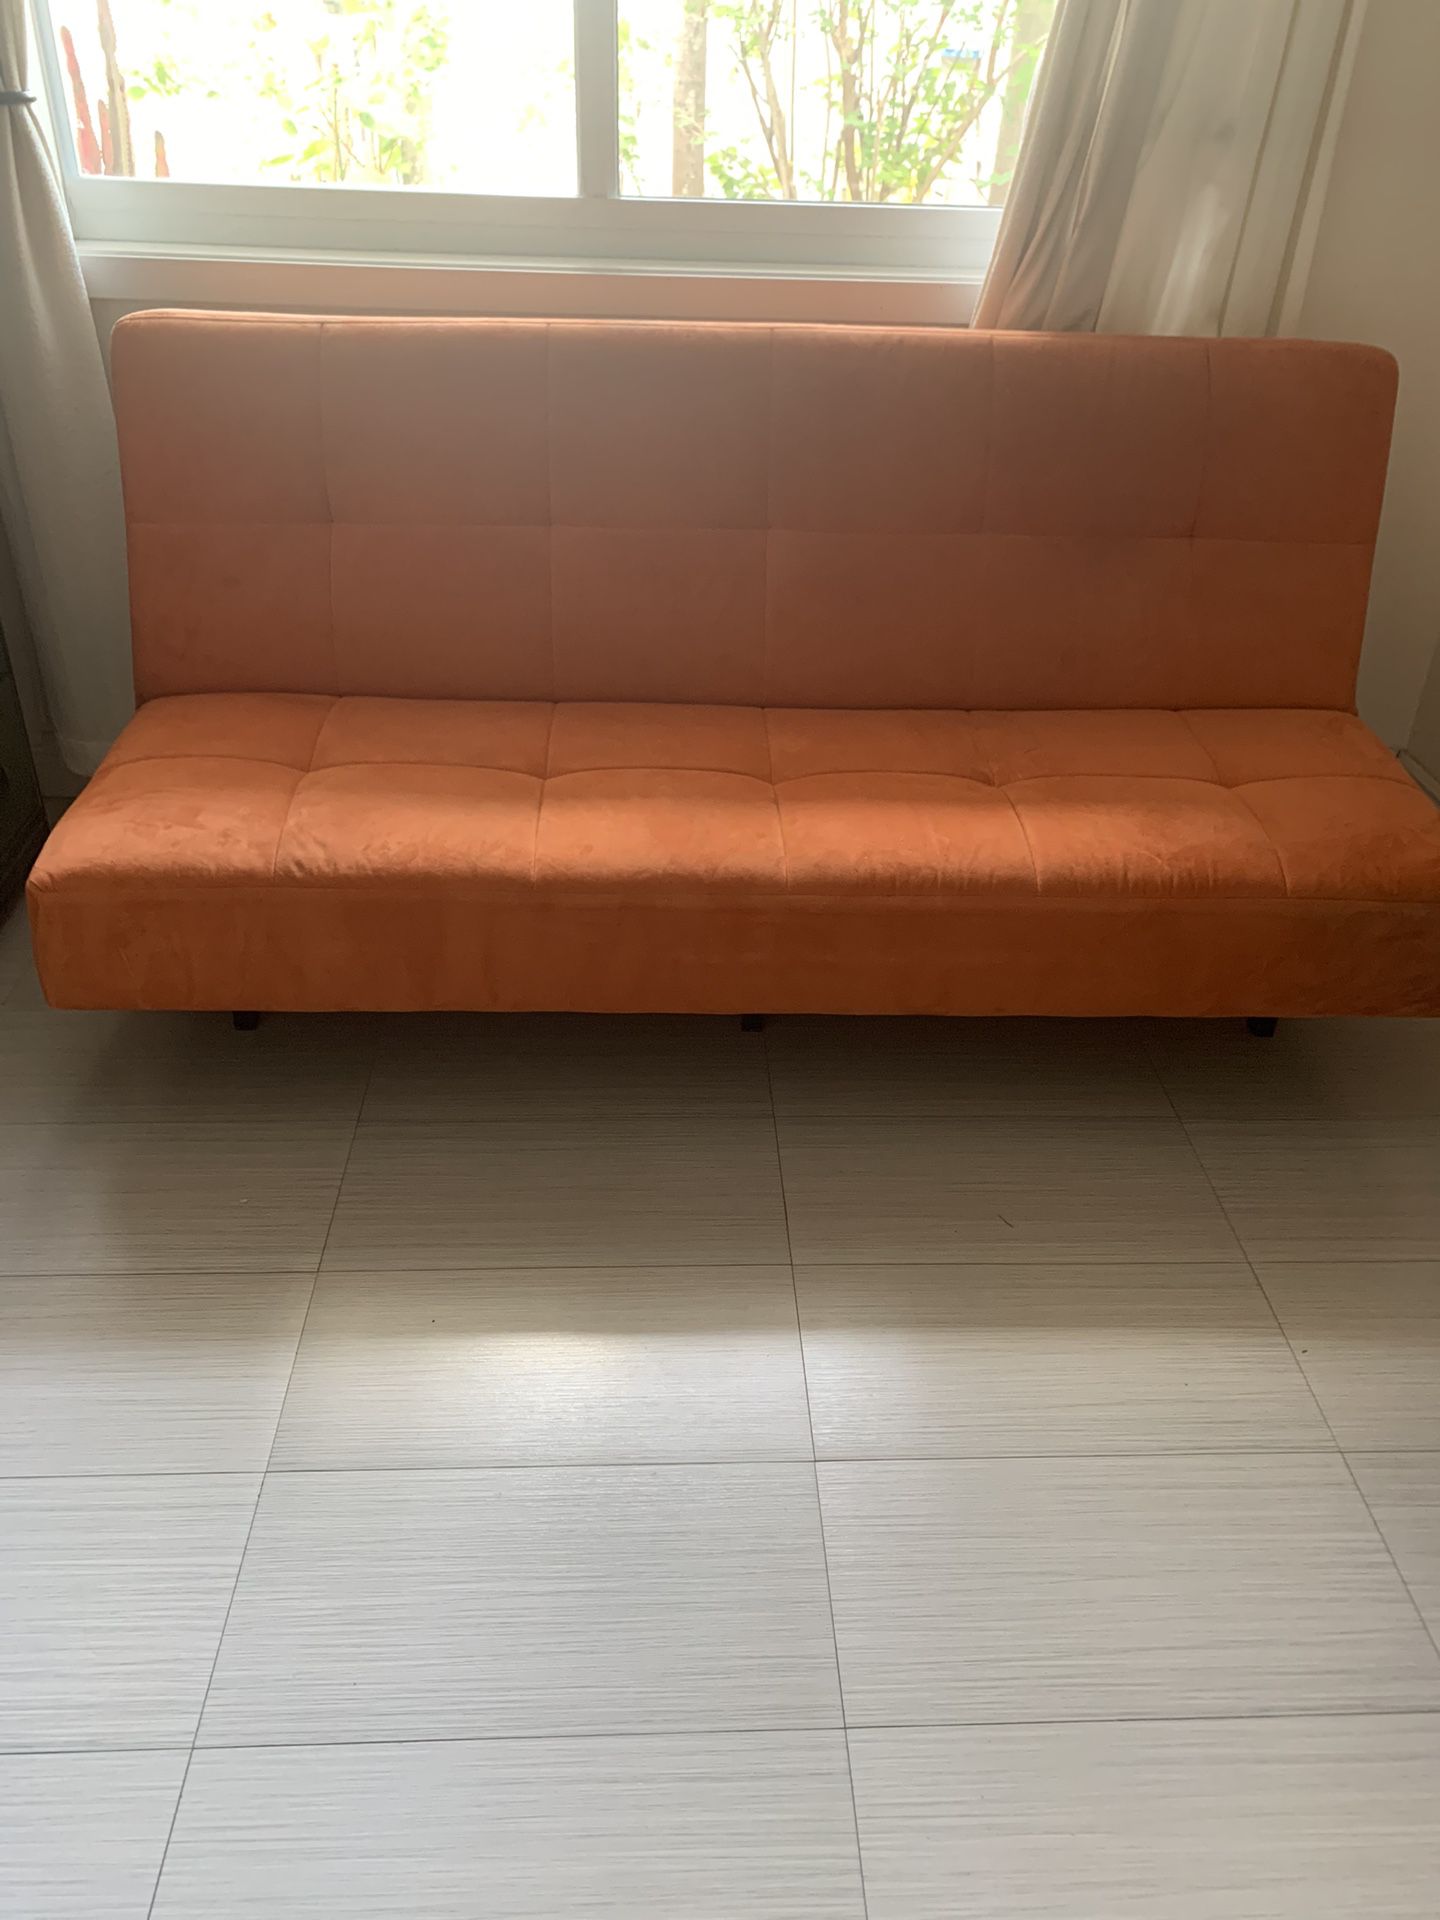 Two Futons  $50 Each 